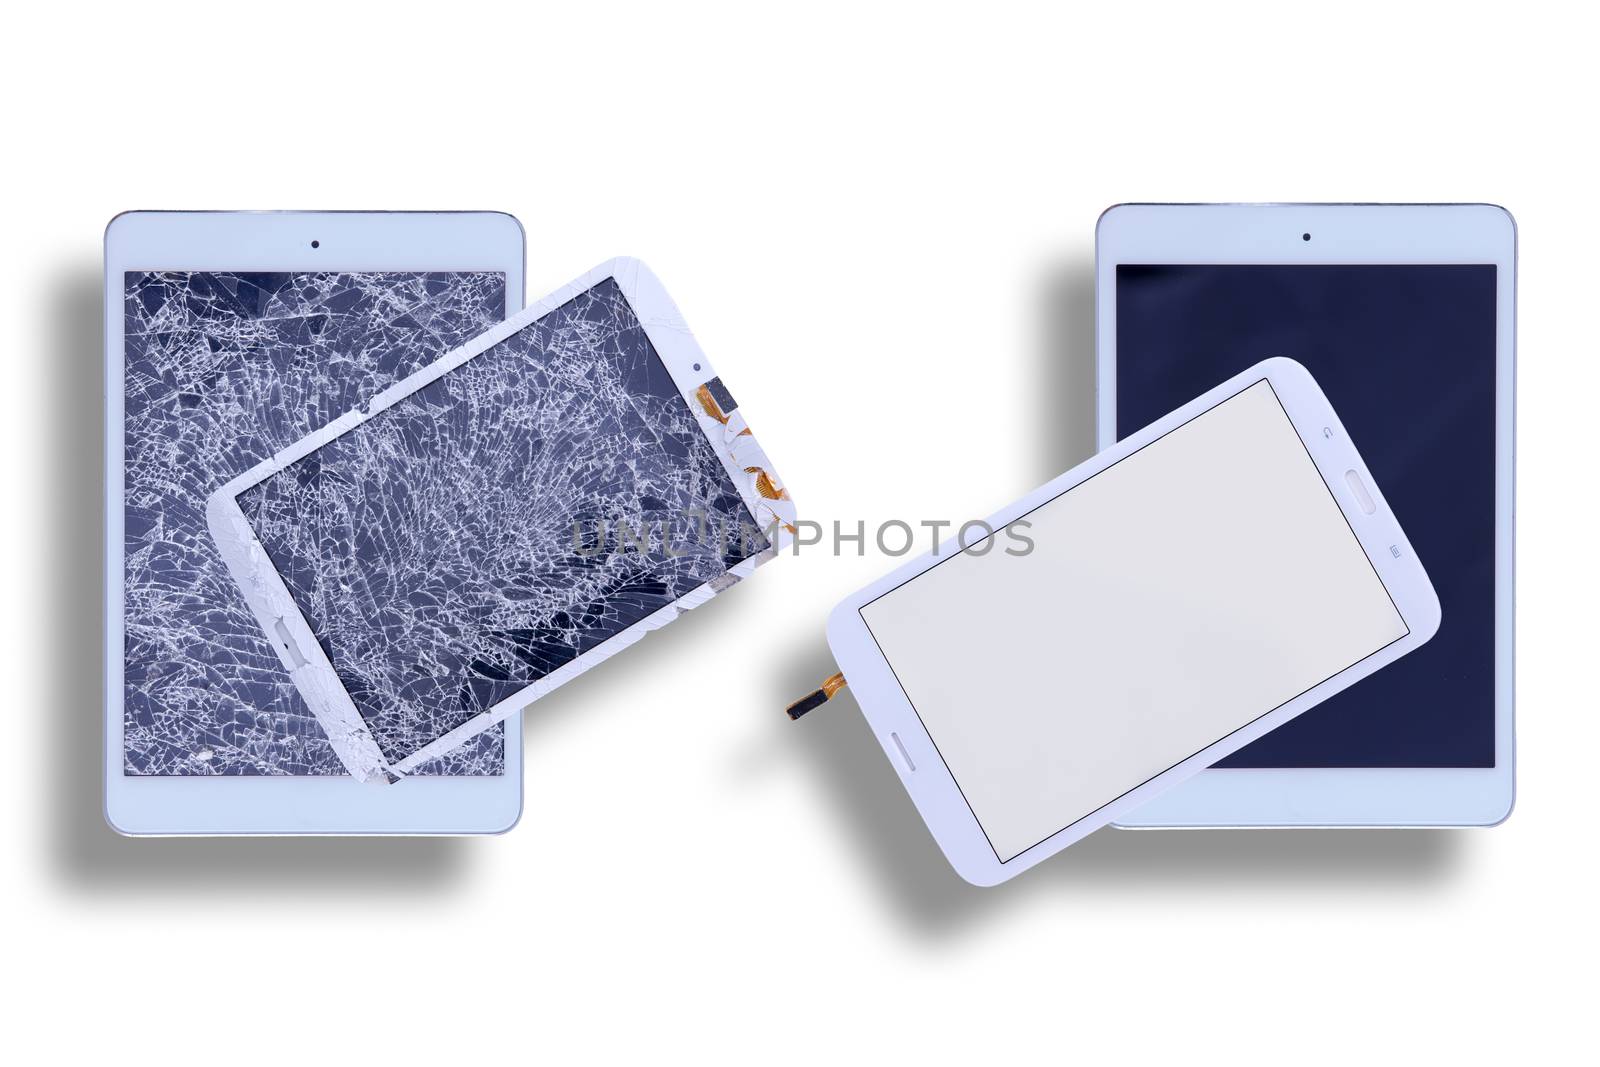 Shattered and repaired tablet screens by coskun